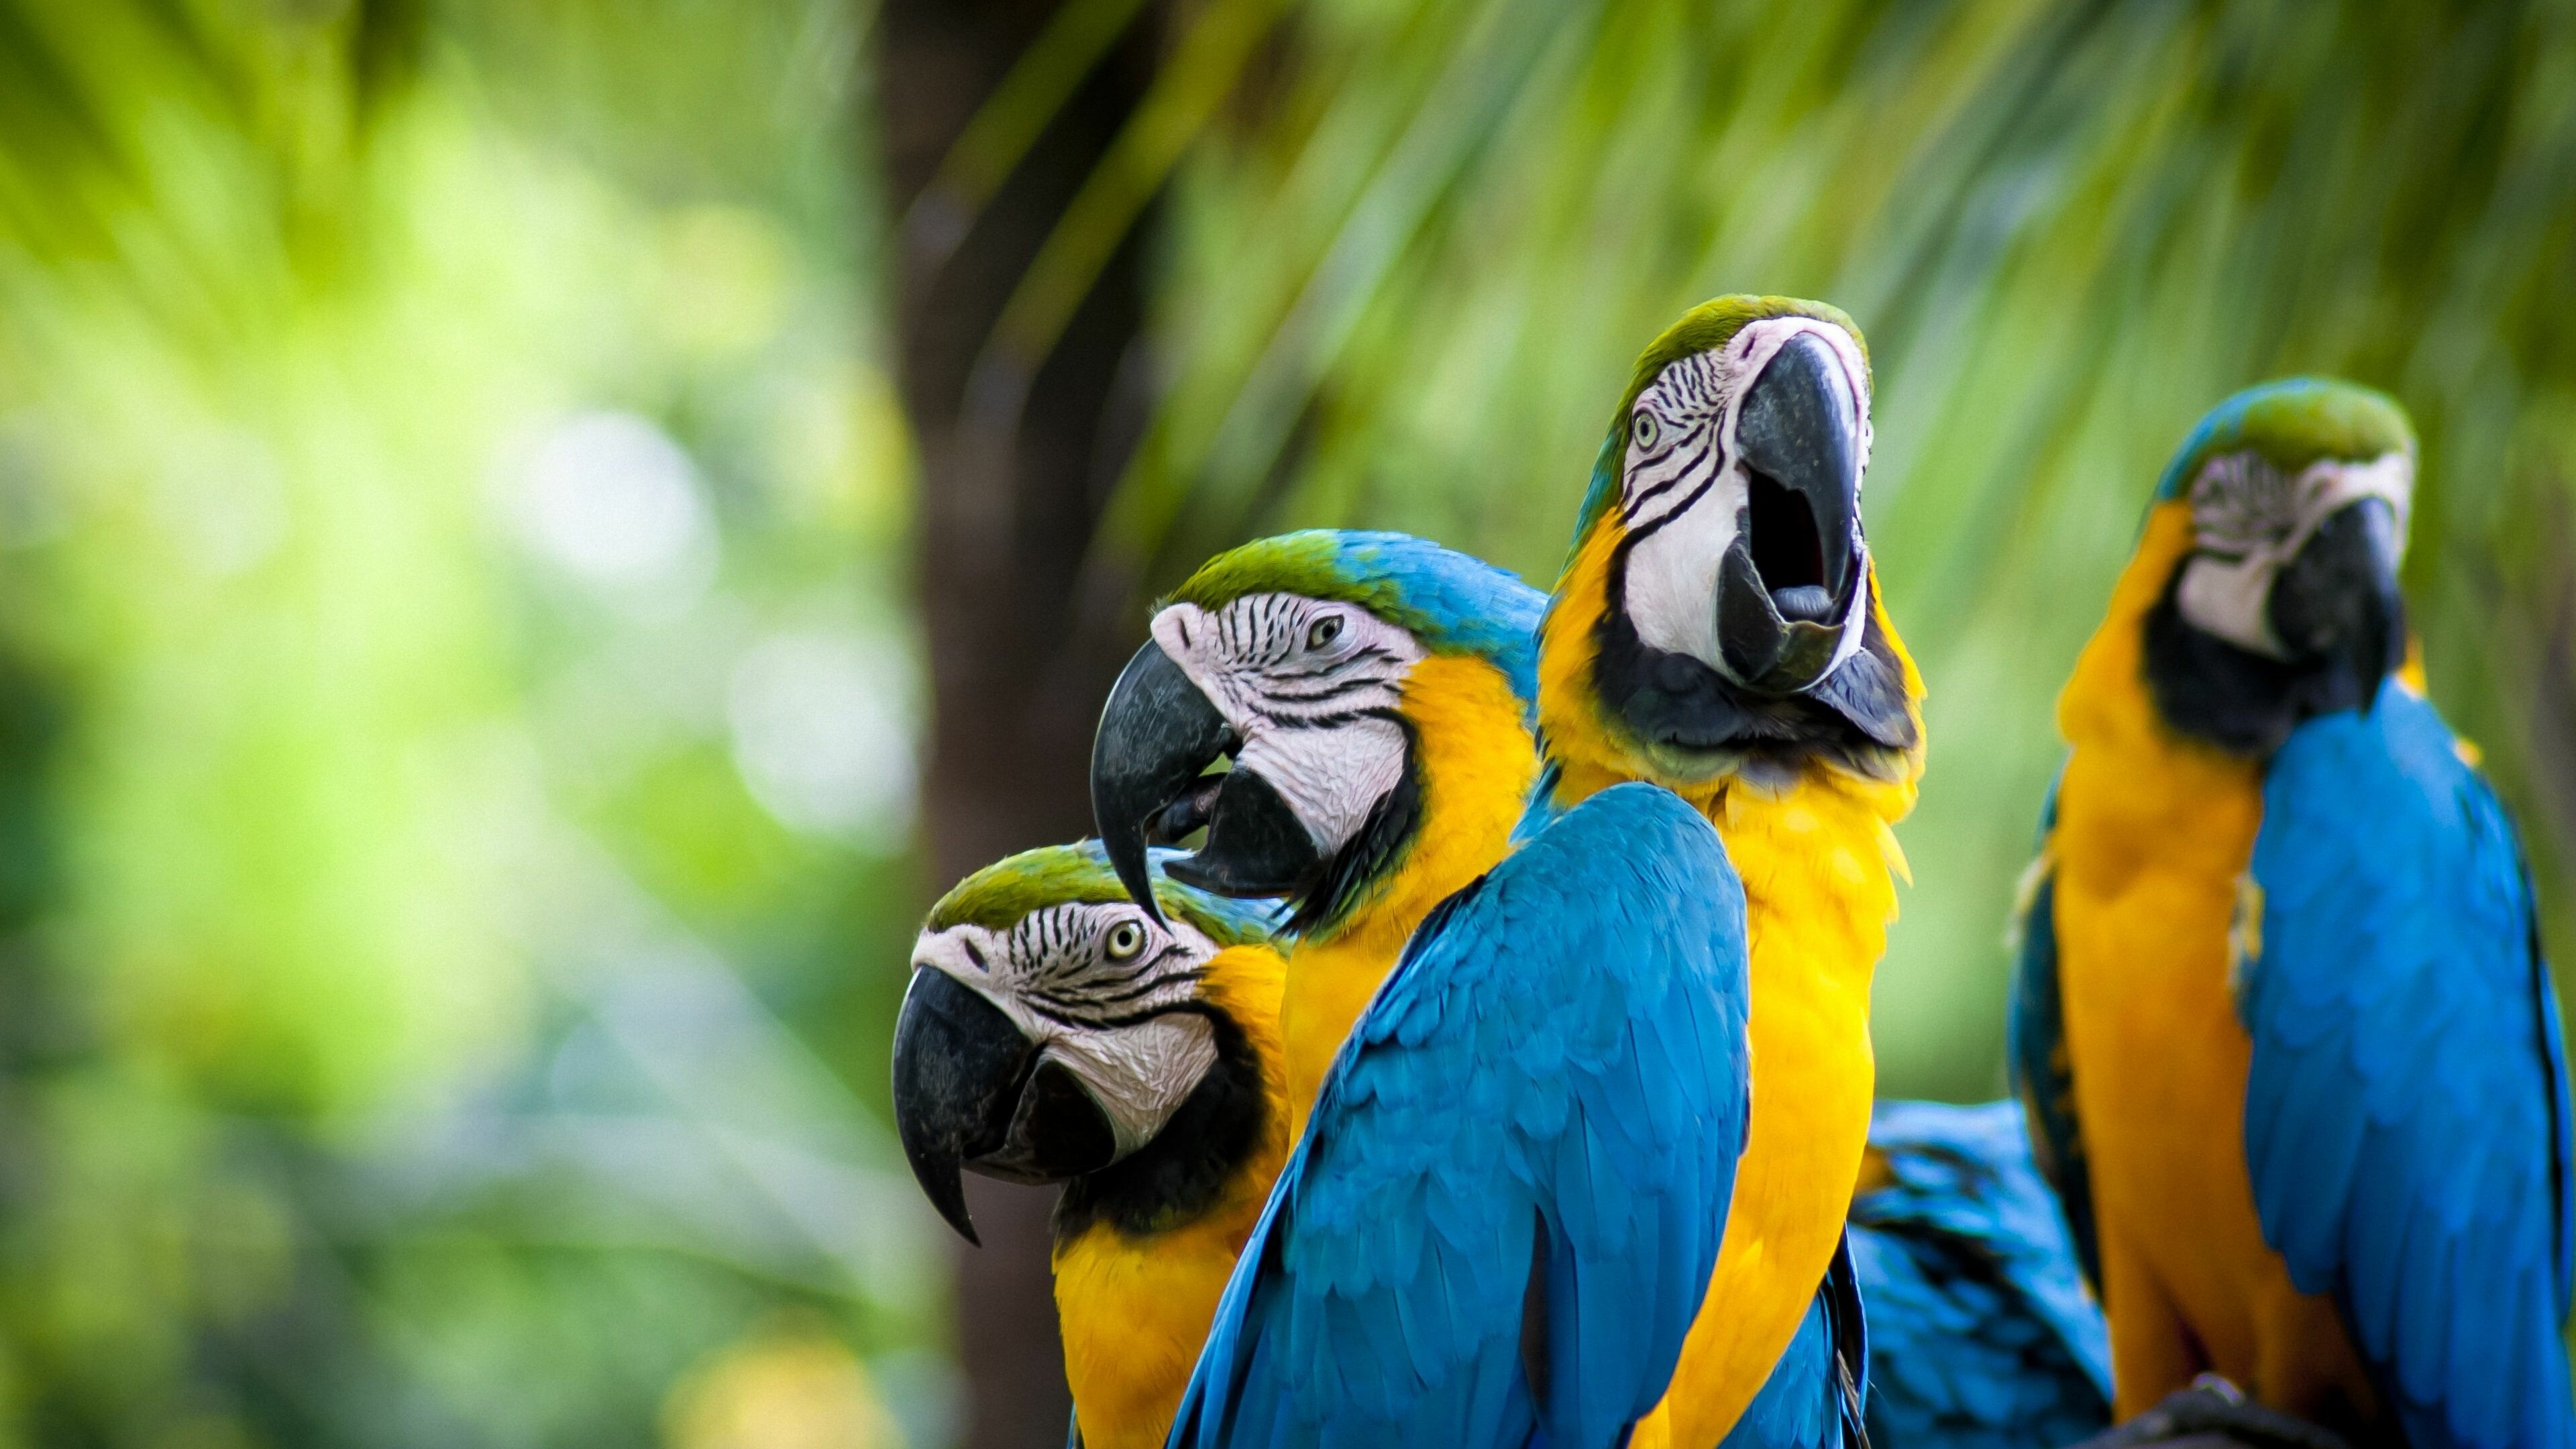 Bird: Macaws, A group of New World parrots that are long-tailed and often colorful. 3840x2160 4K Wallpaper.